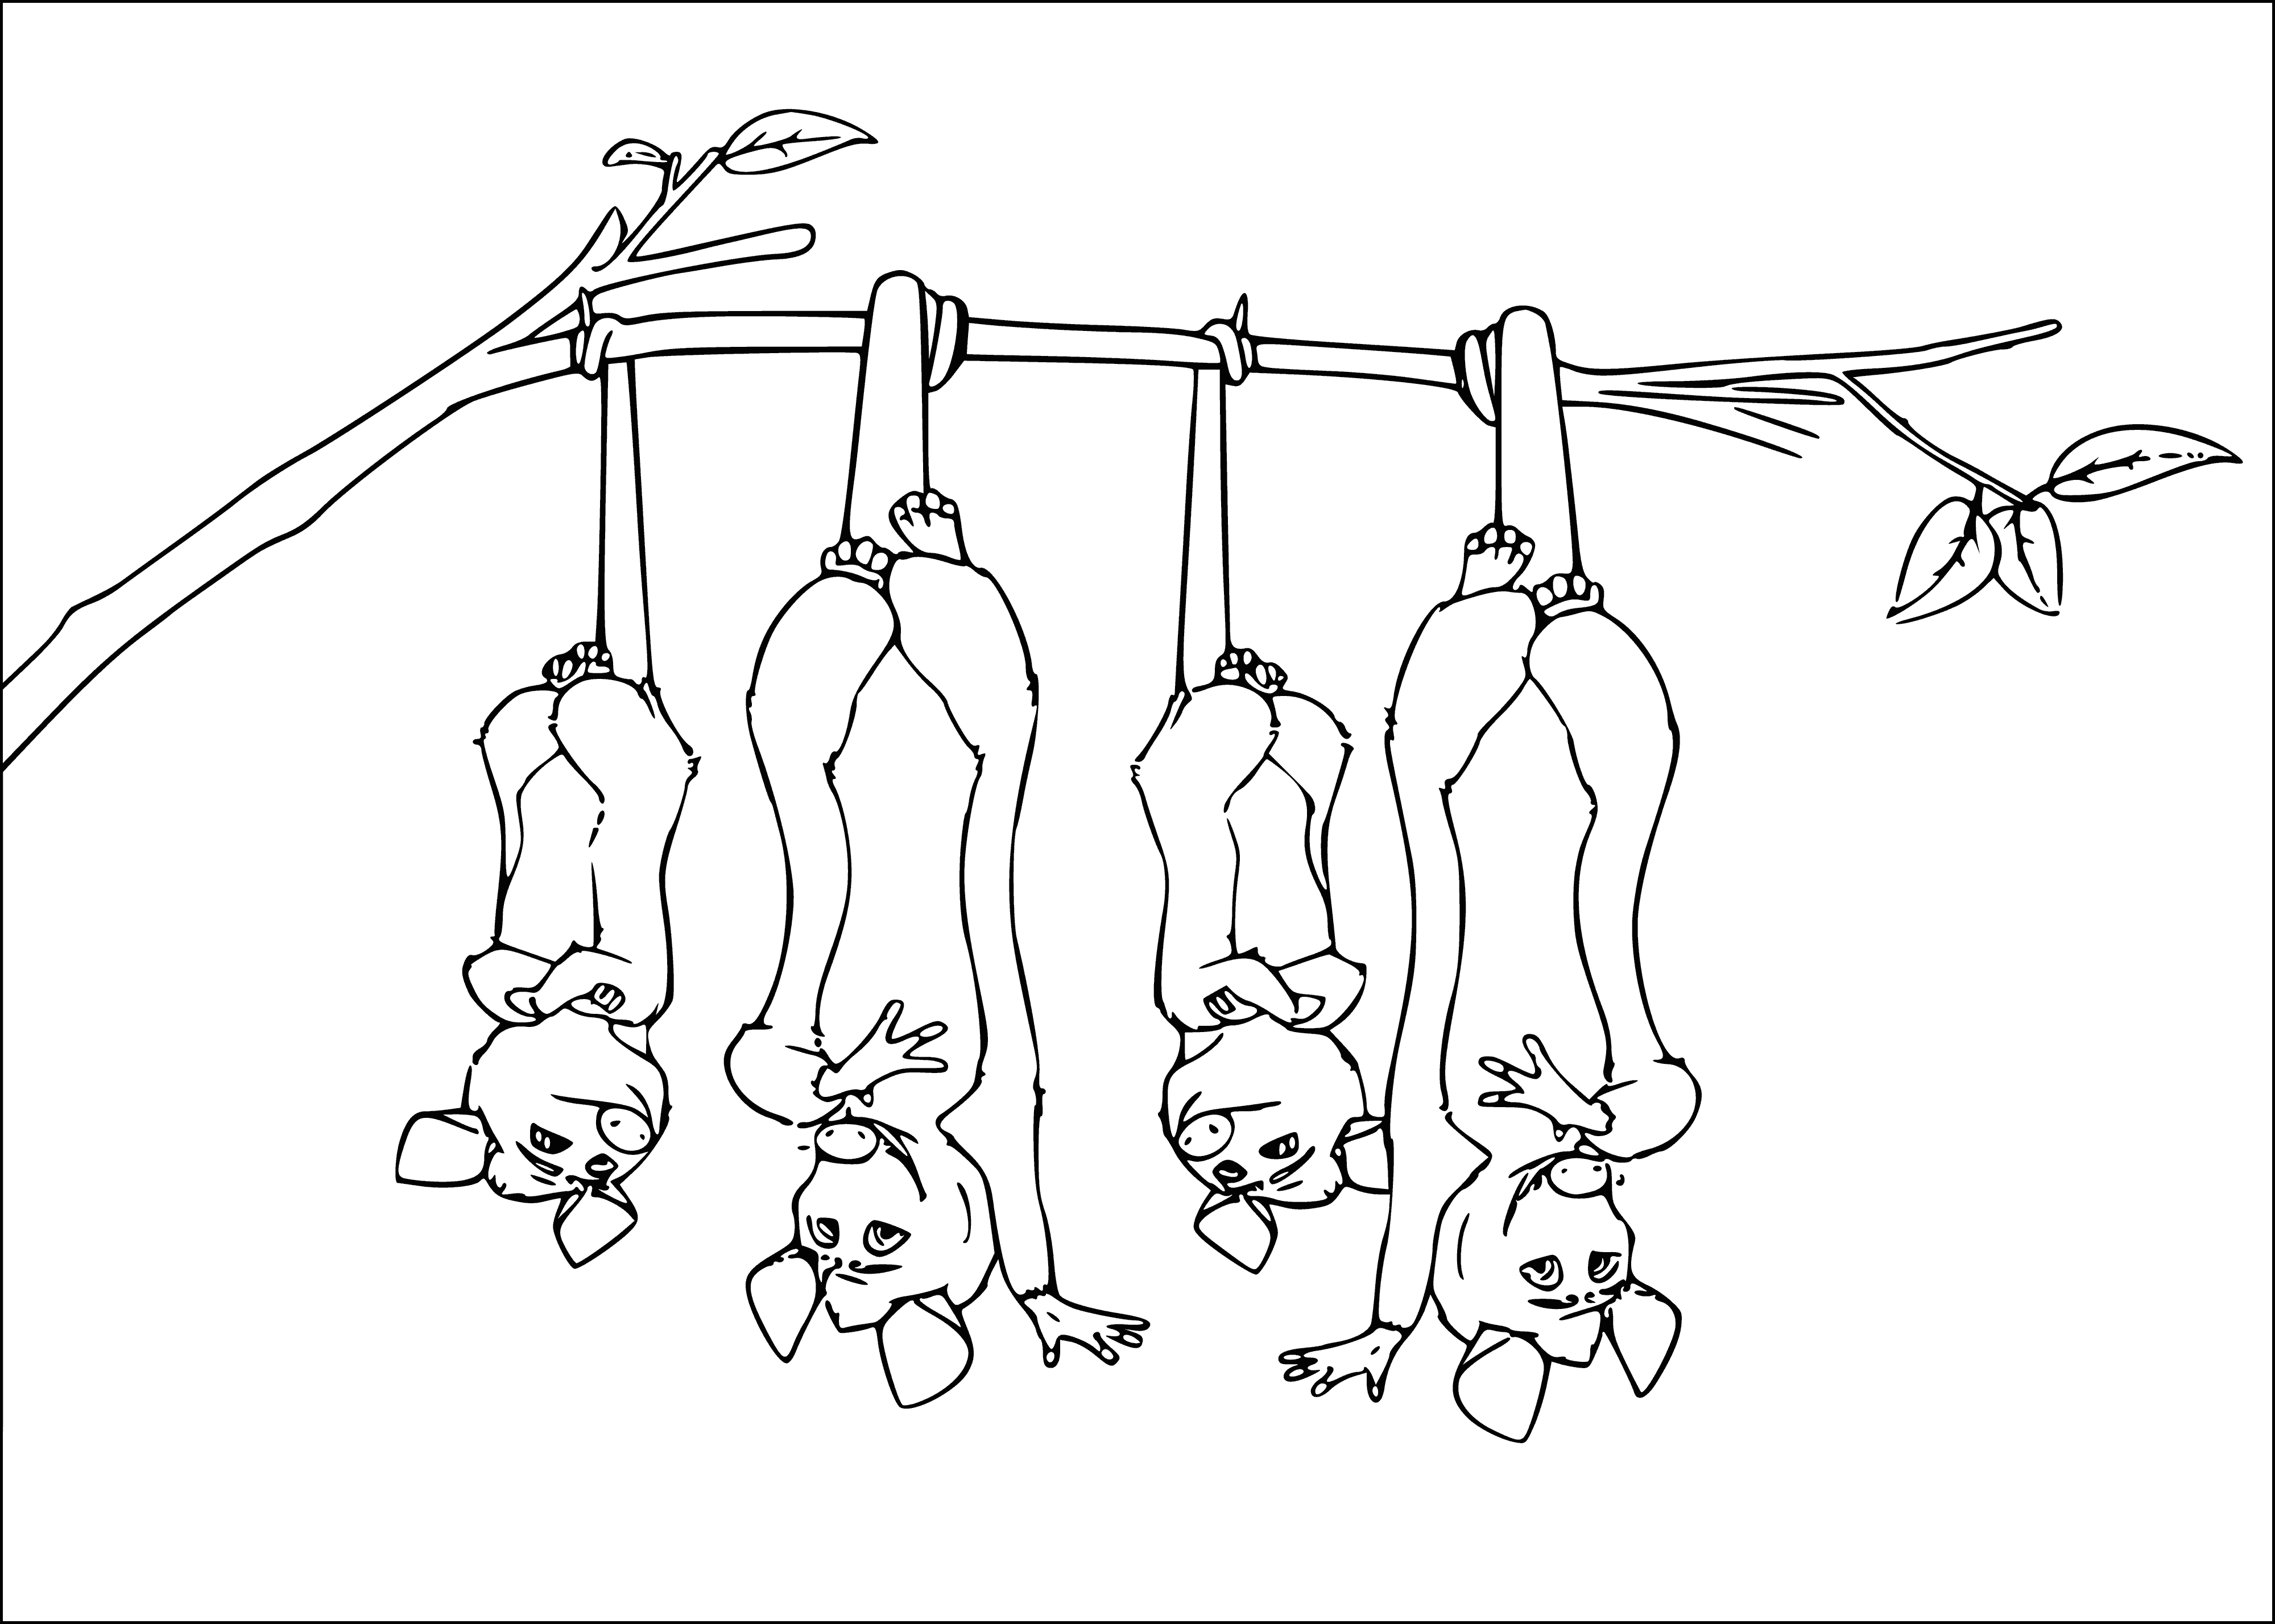 Opposums coloring page